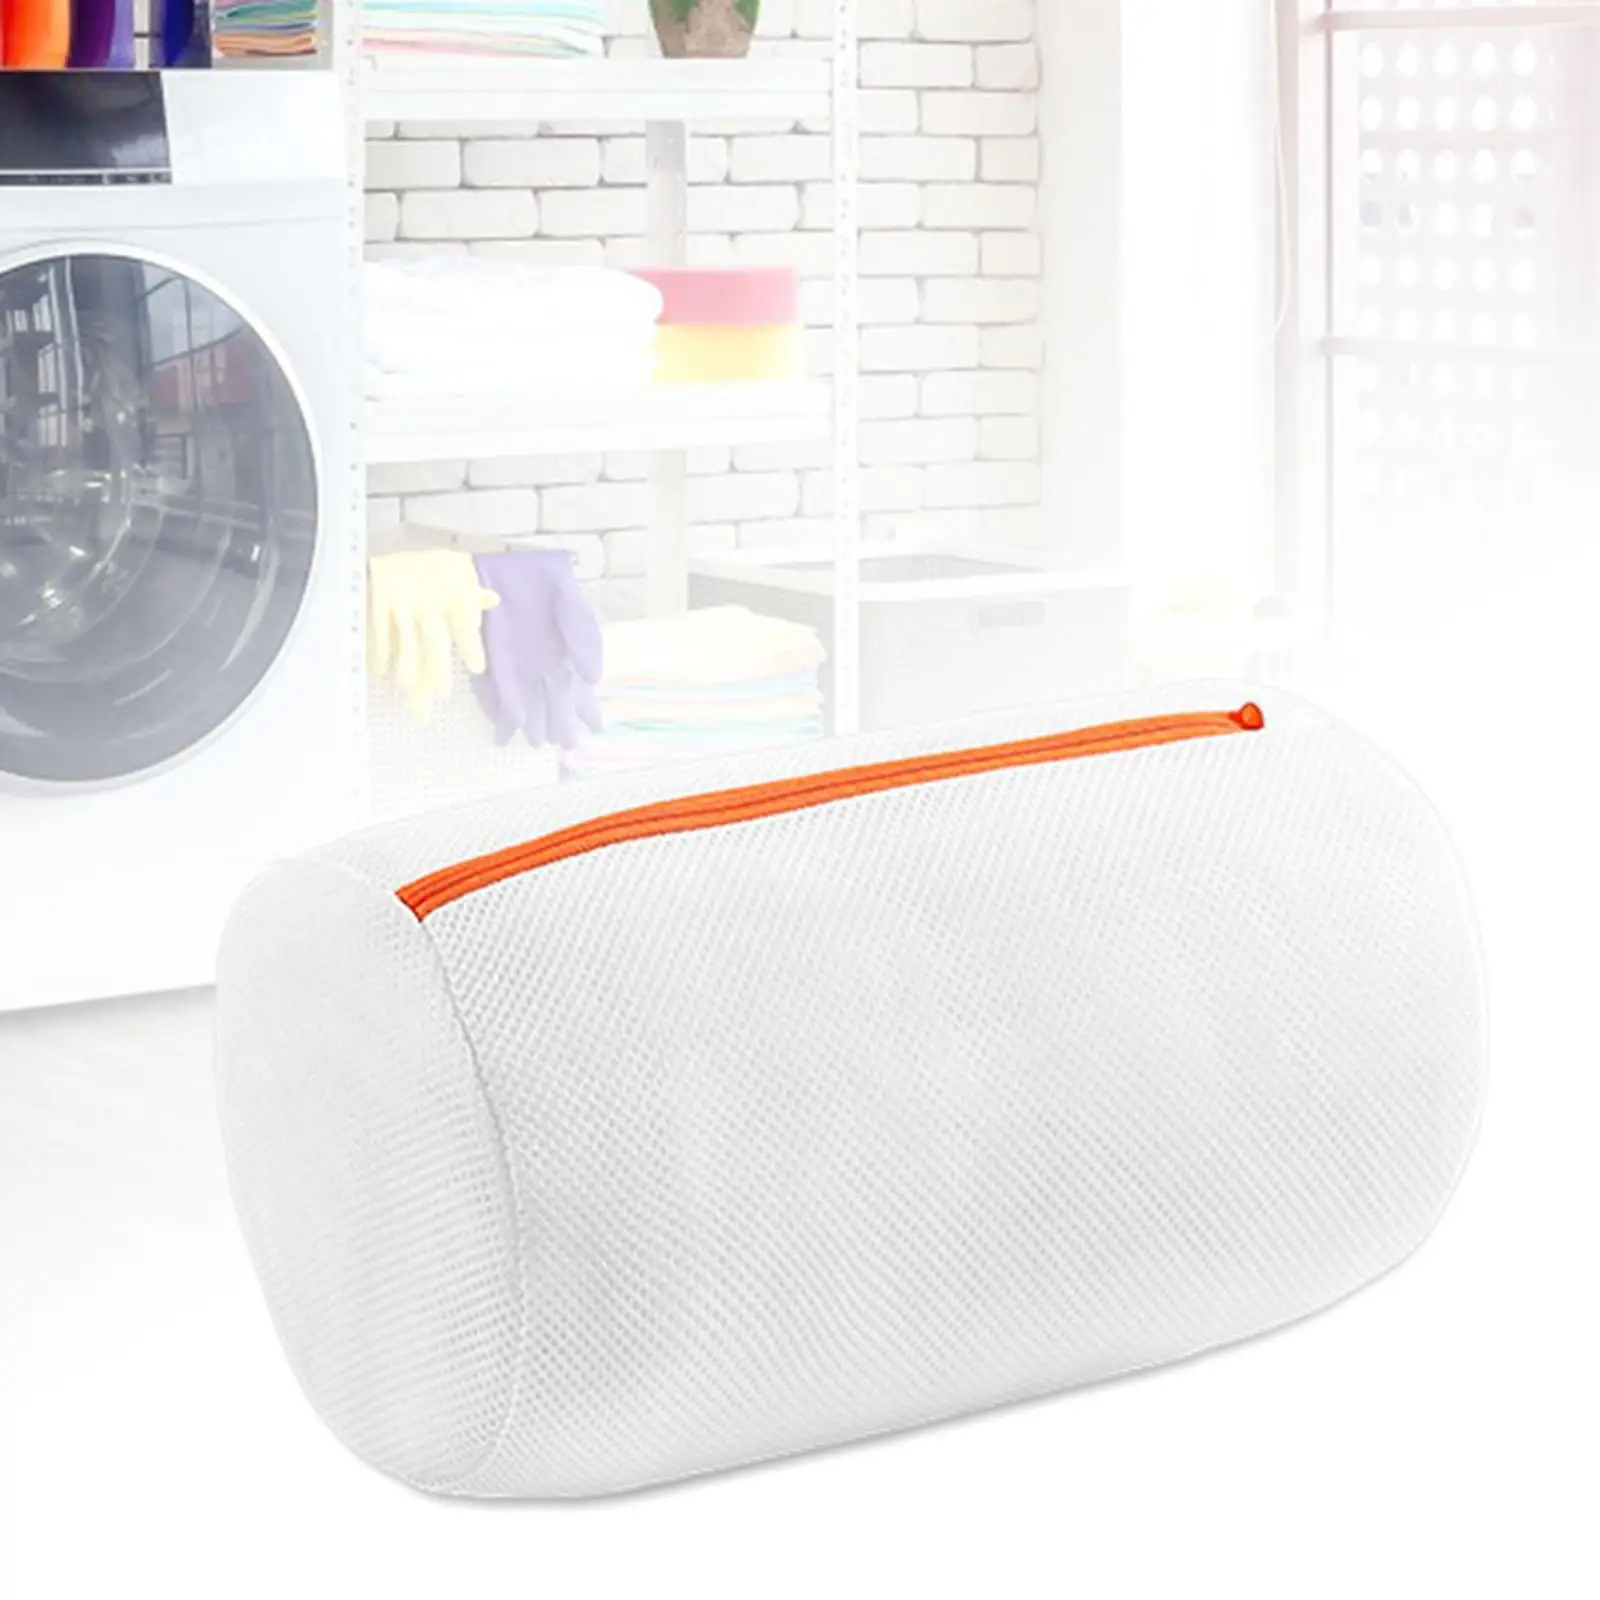 Zipped Wash Bag, Basket Pouch Reusable Portable Thickening Mesh Laundry Bags for Shared Washes Travel Hosiery Stocking Coat